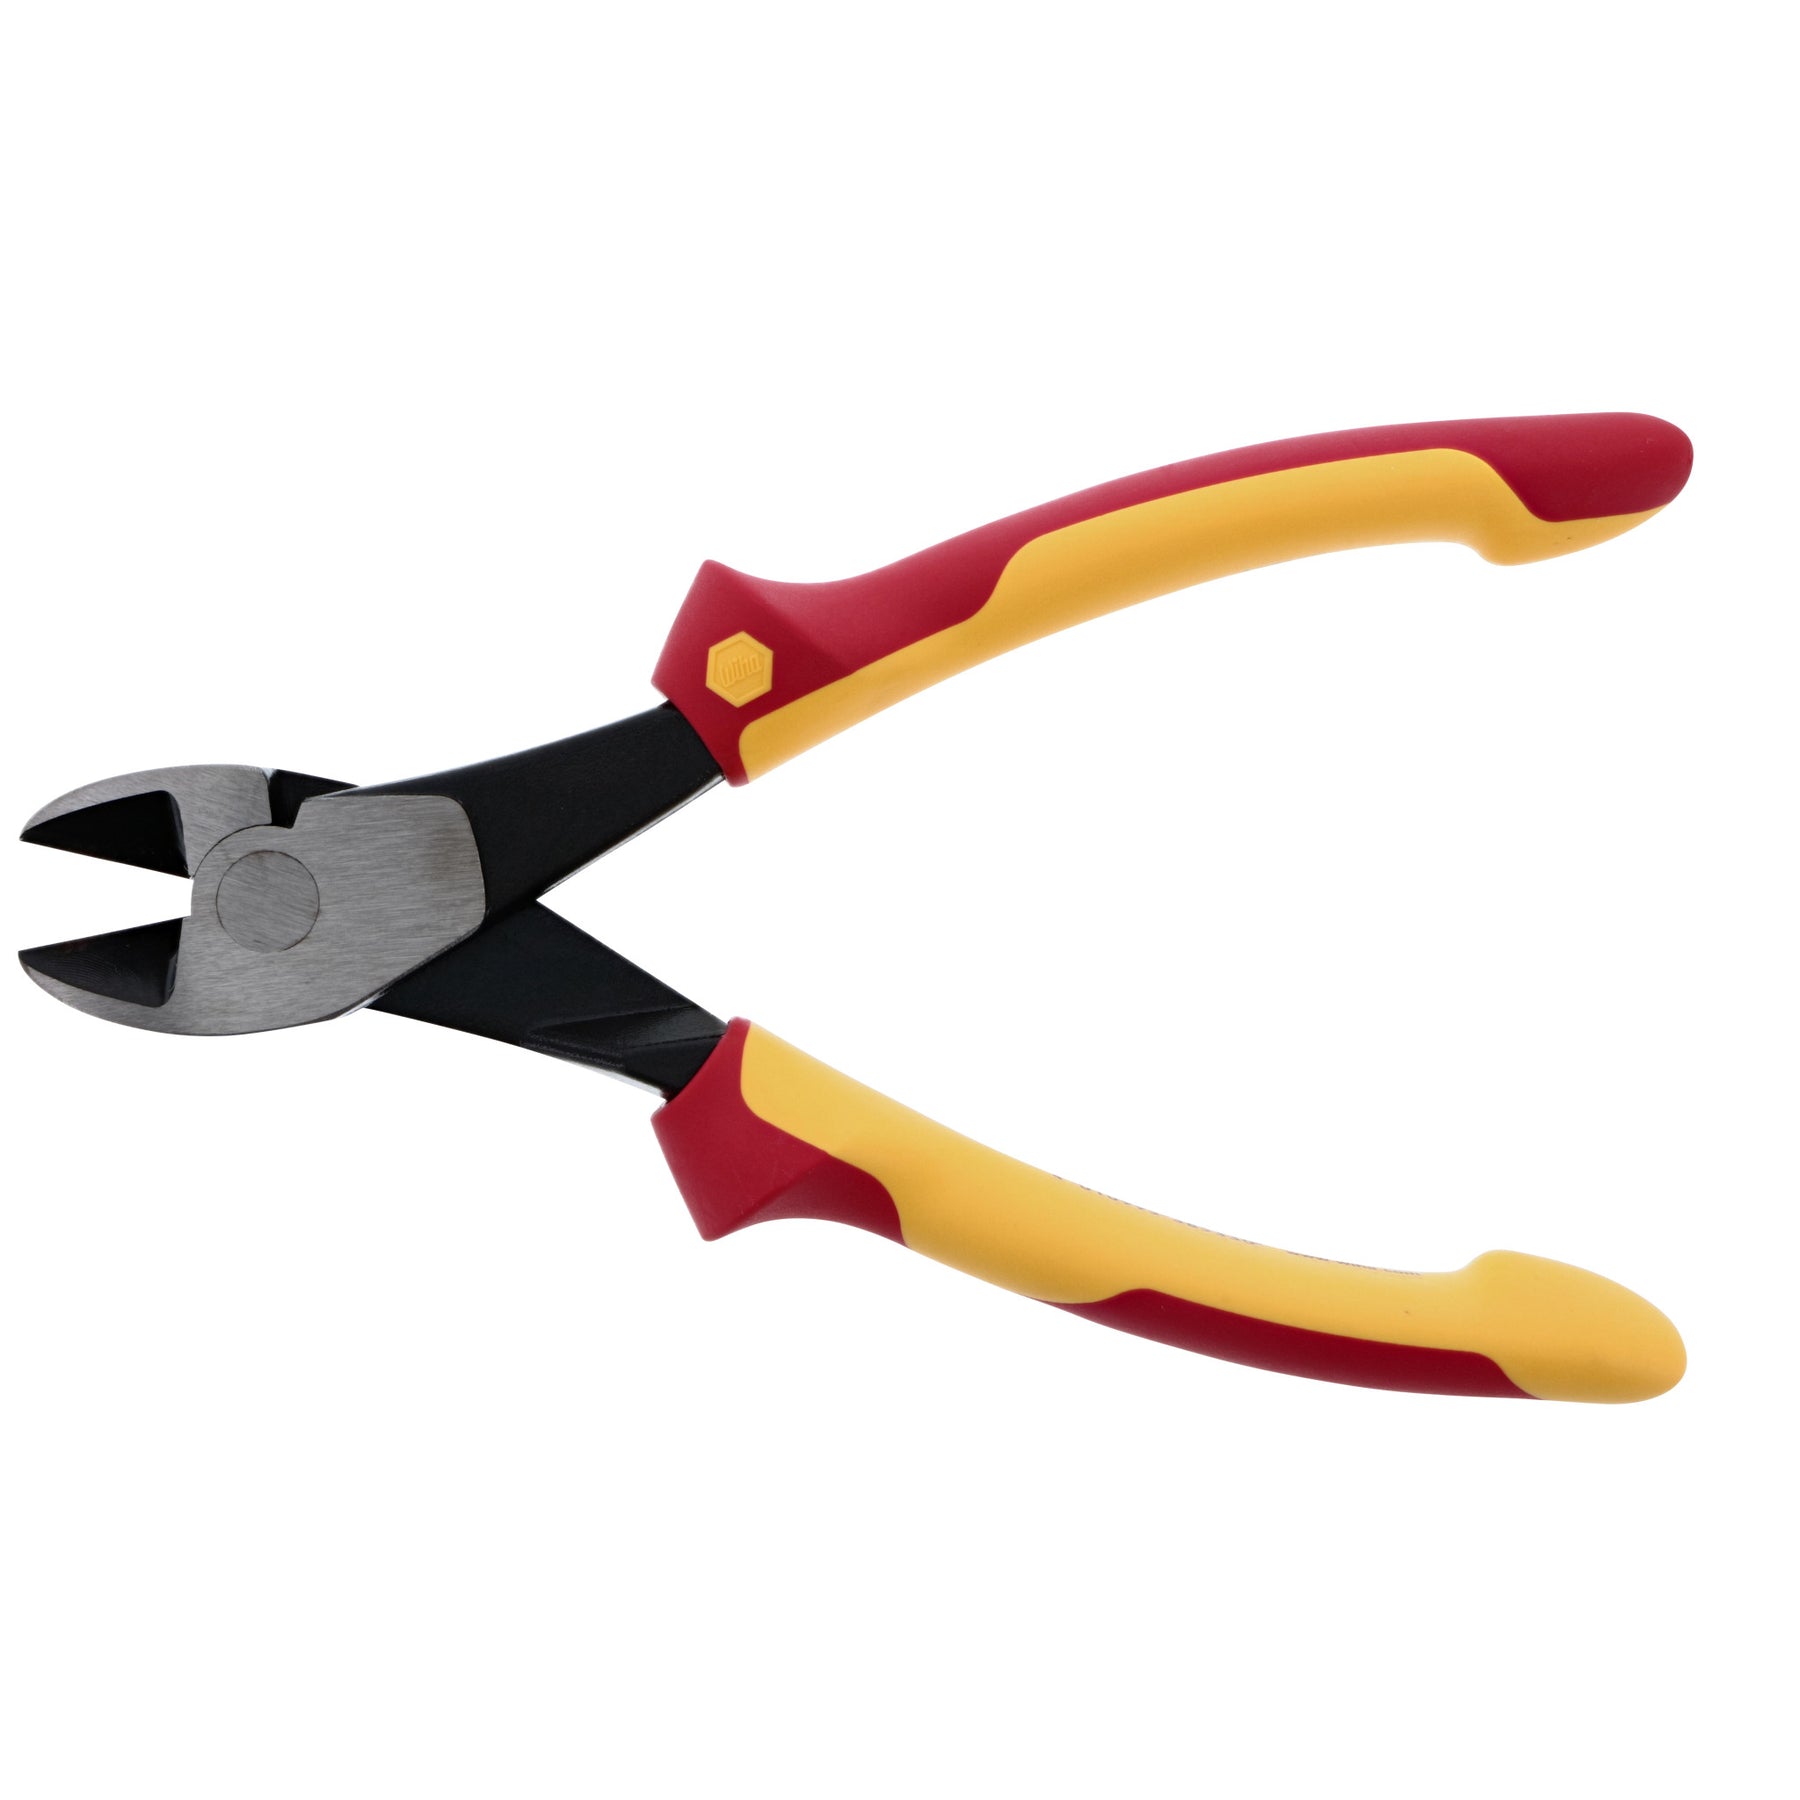 Insulated Industrial High Leverage Diagonal Cutters 8.0"